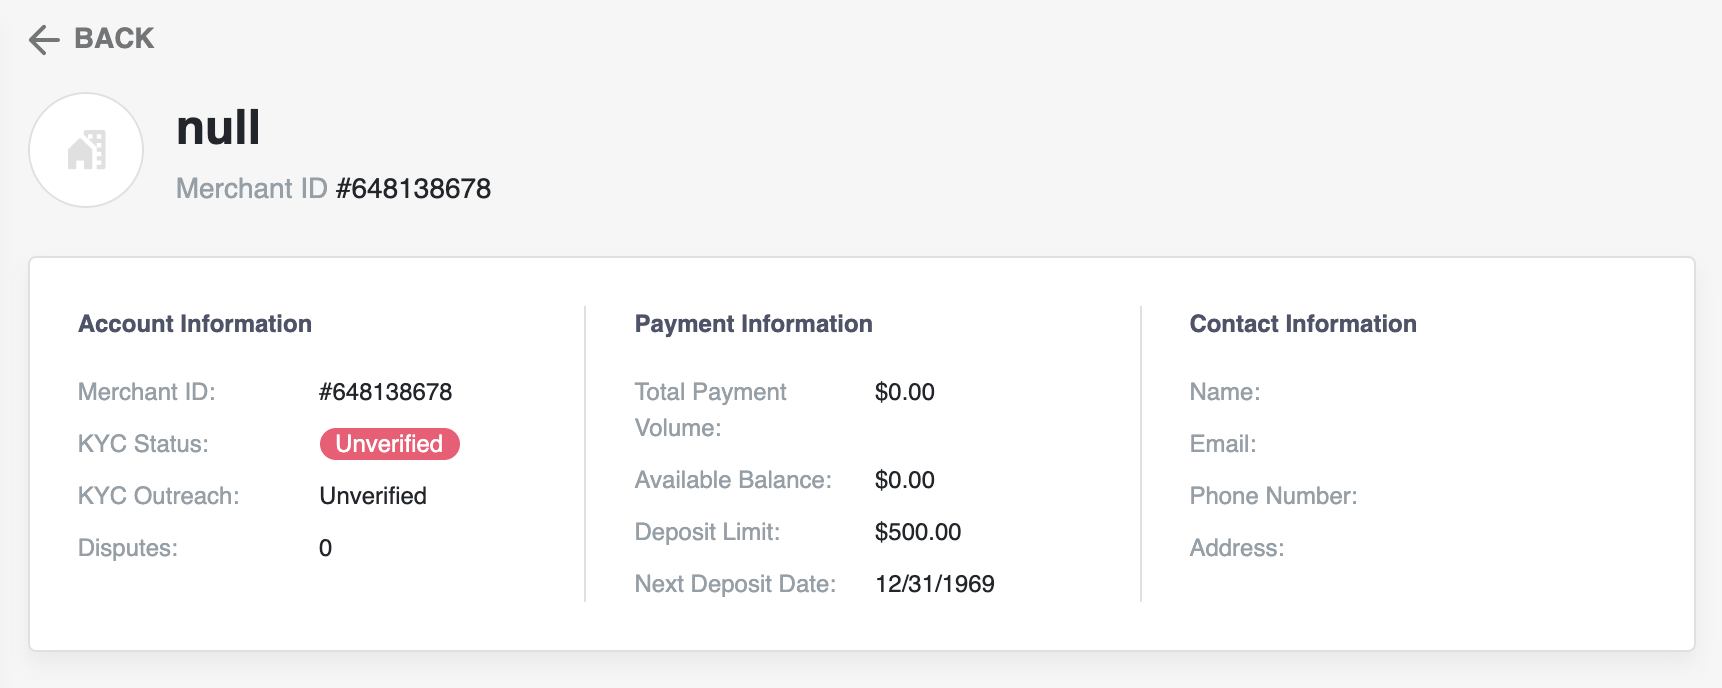 An example of how account details show up in WePay's Partner Center.